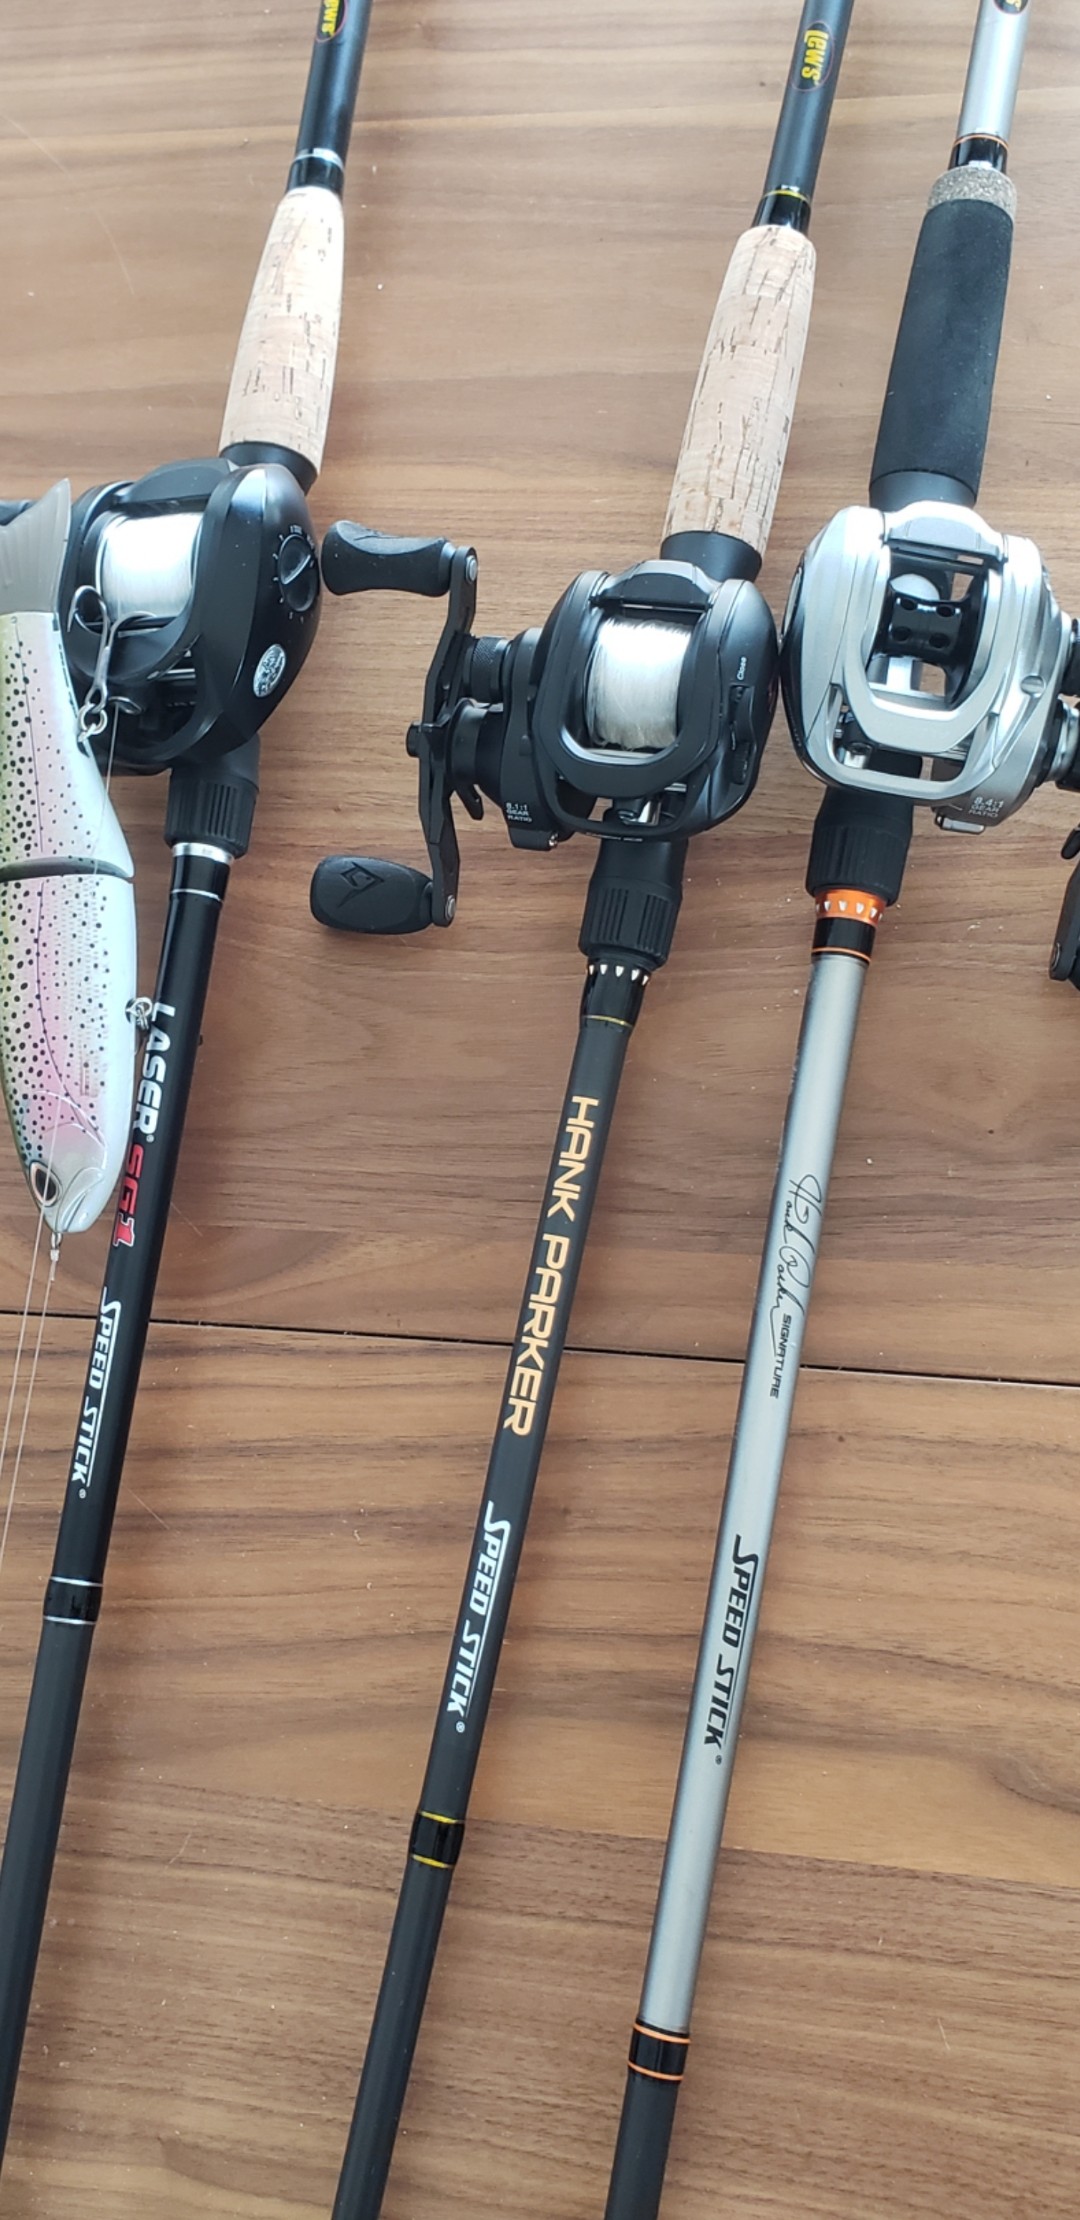 Super cheap gems - Fishing Rods, Reels, Line, and Knots - Bass Fishing  Forums